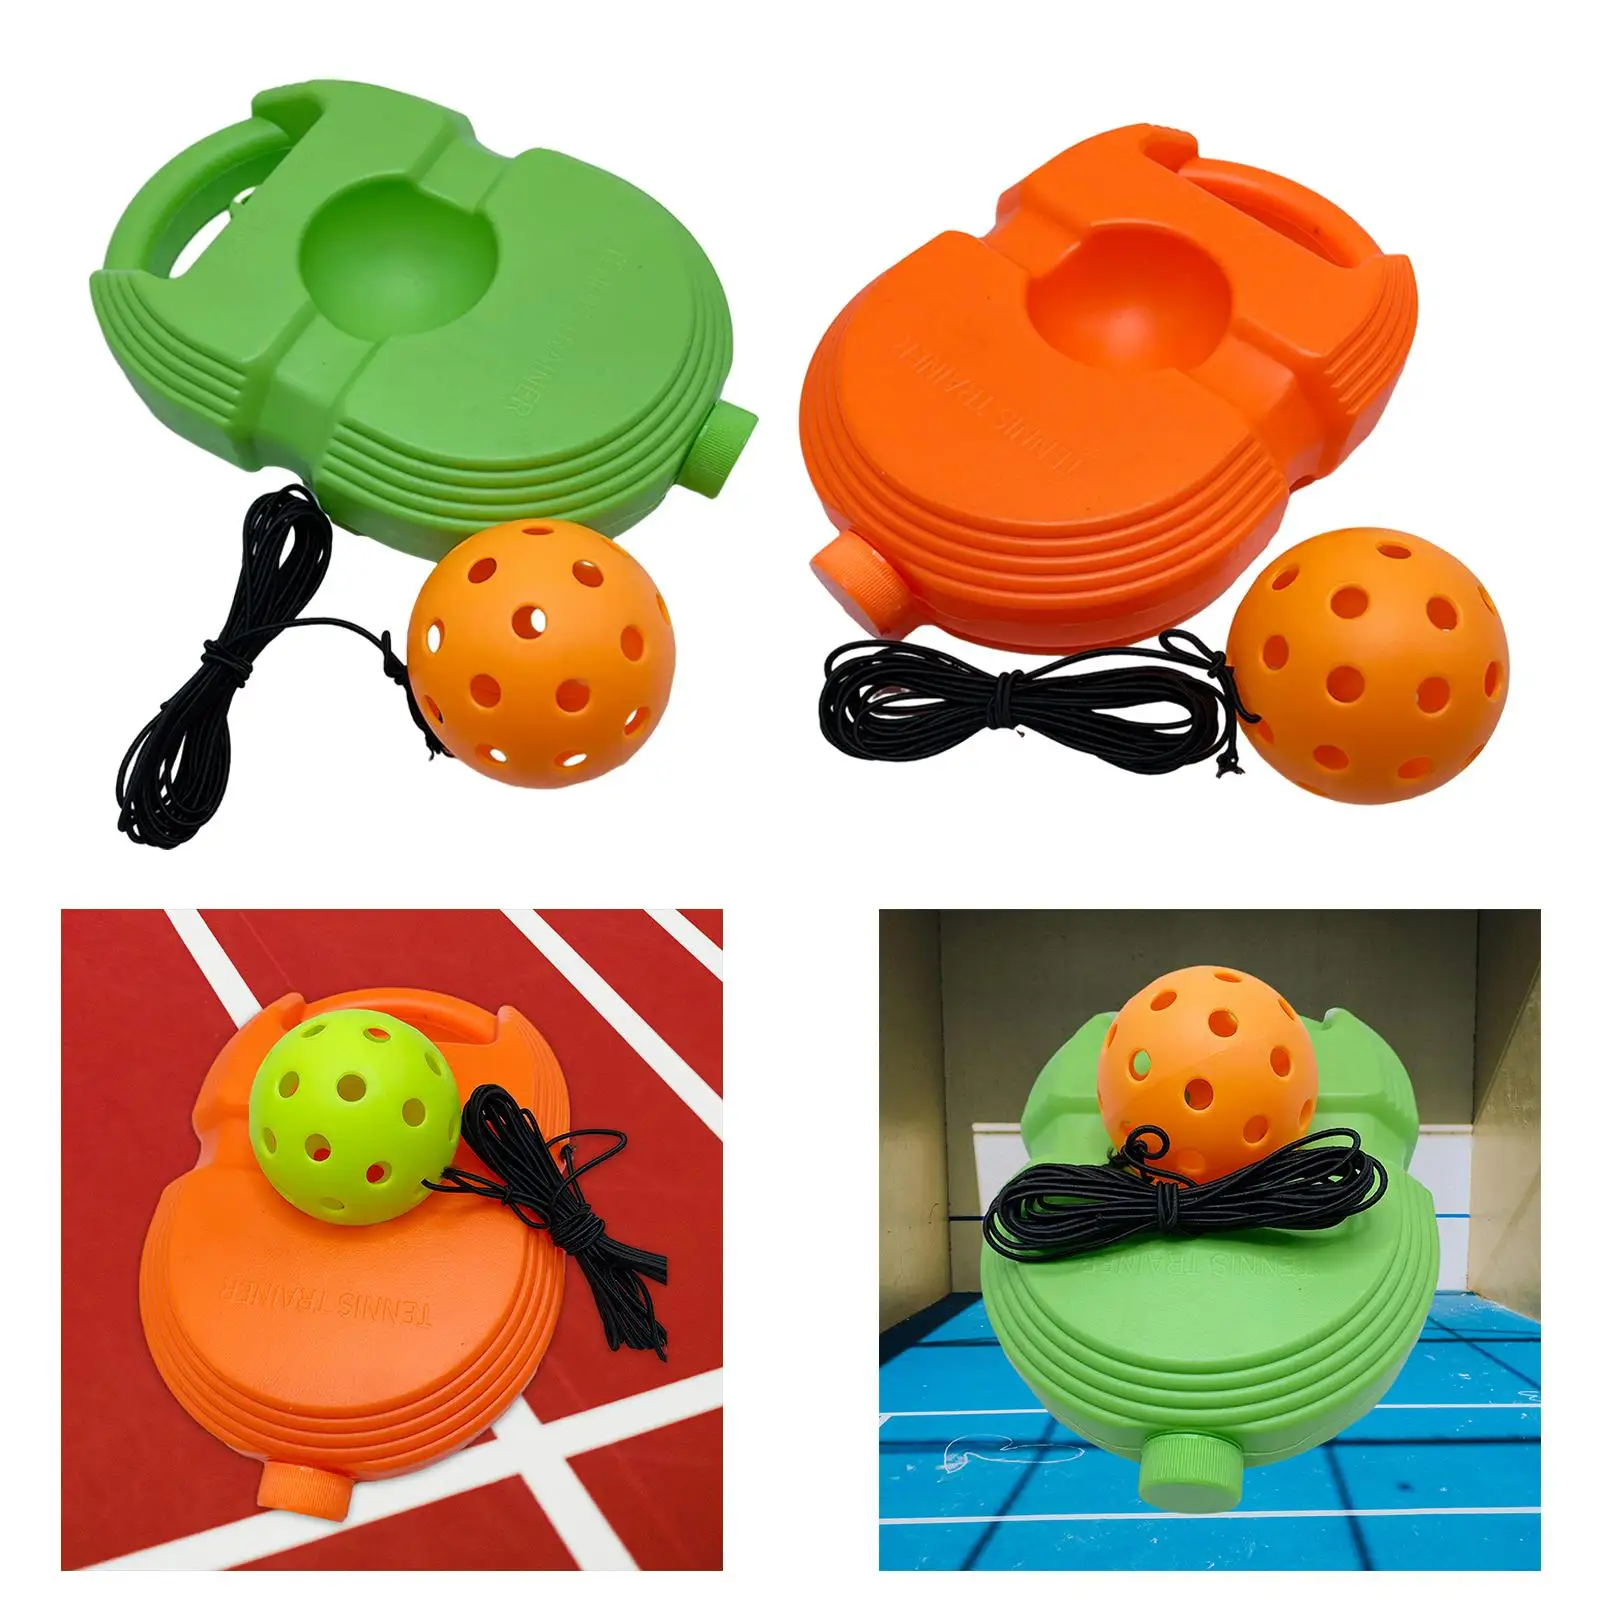 Solo Tennis Training Tennis Trainer Professional Exerciser with Ball Tennis Rebounder Tennis Training Tool for Outdoor Sports